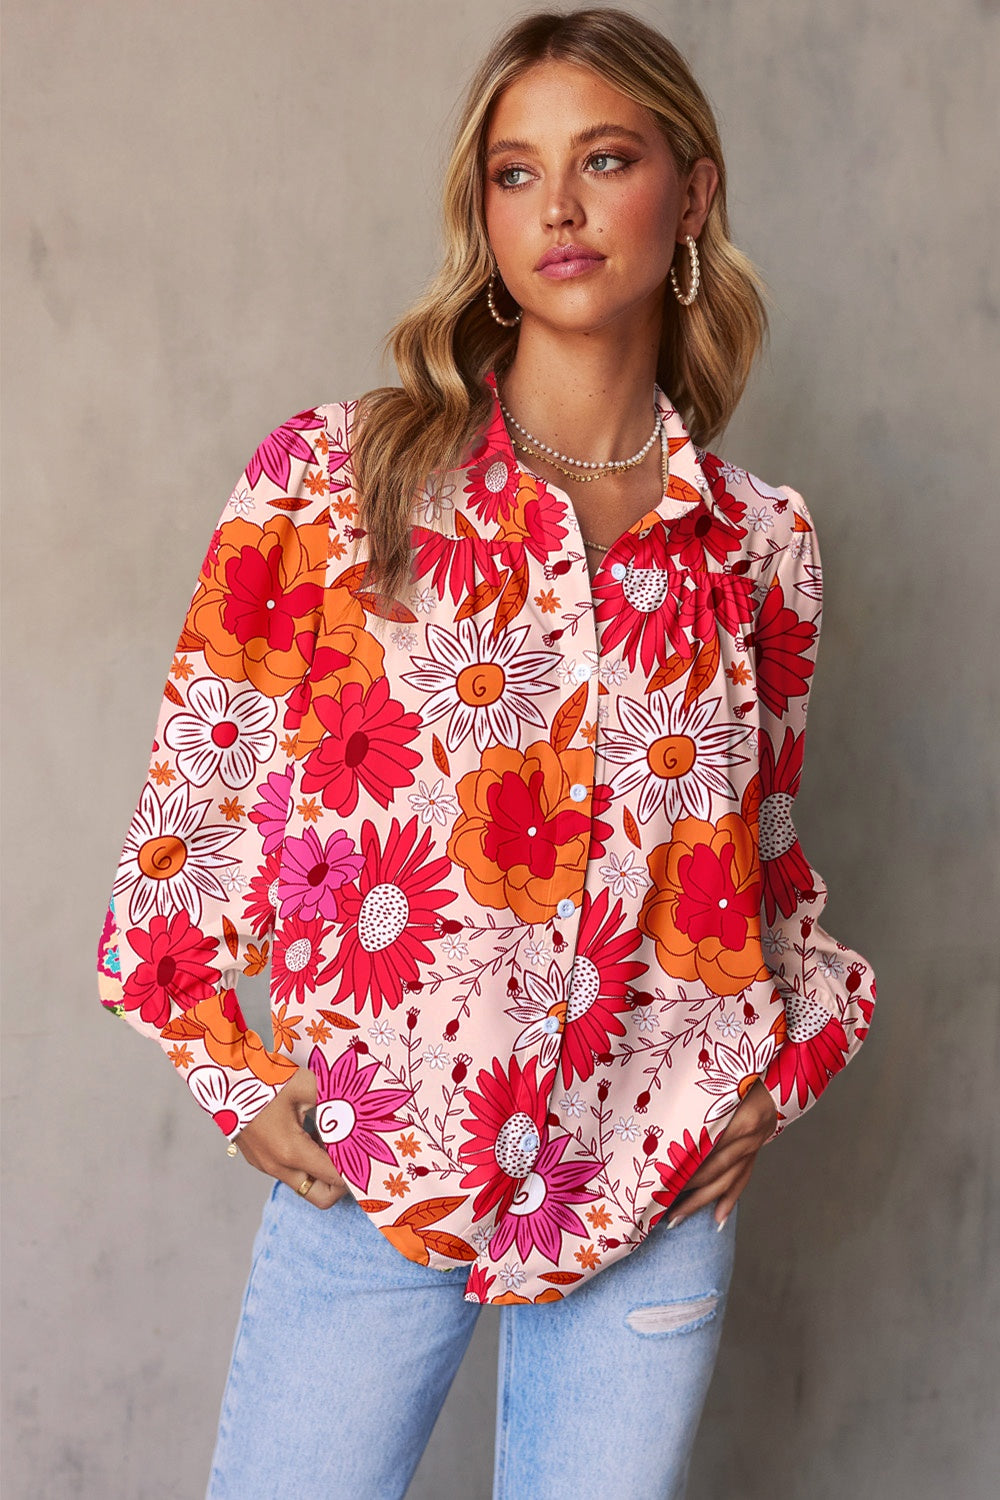 Printed Collared Neck Long Sleeve Shirt (4 Colors)